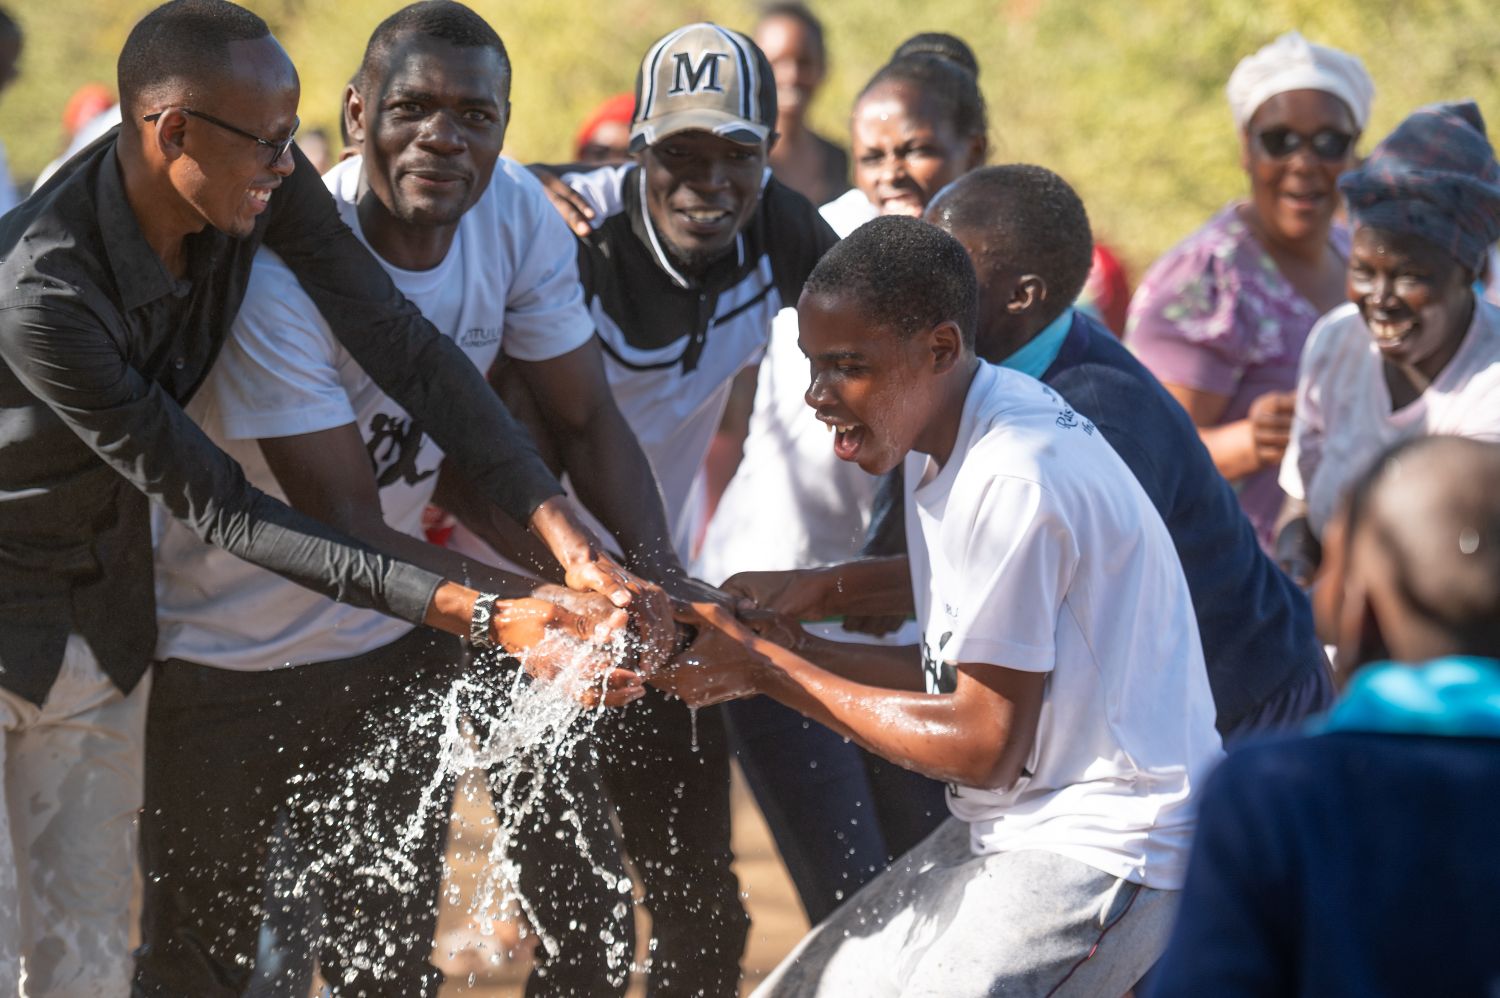 From Scarcity to Abundance, the Ubuntu Life Campus now has Water